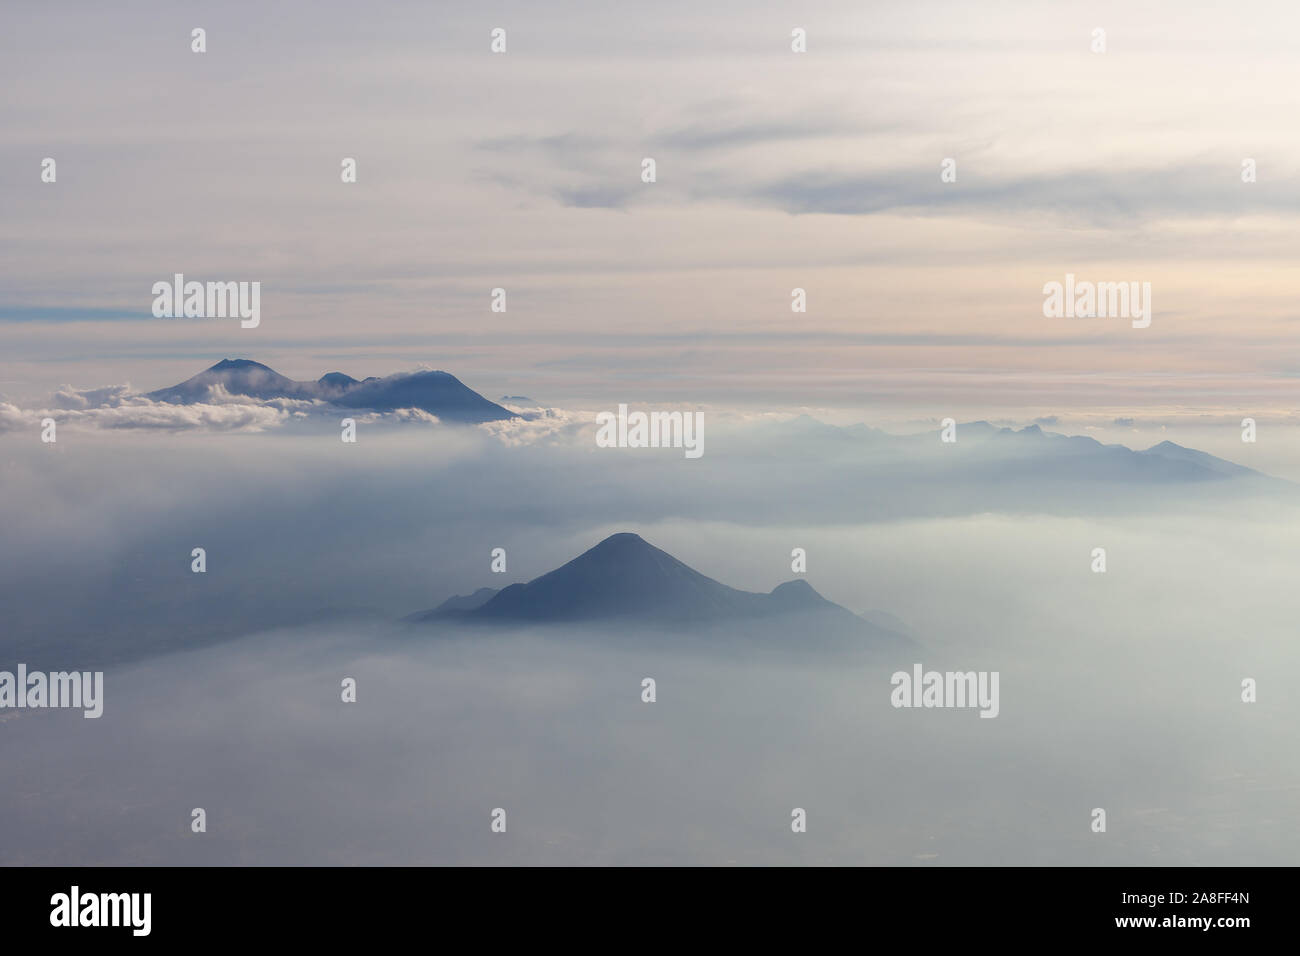 Aerial view of different volcanoes on Java Island. The fog adds to a mystical appearance of these sleeping beauties. Stock Photo